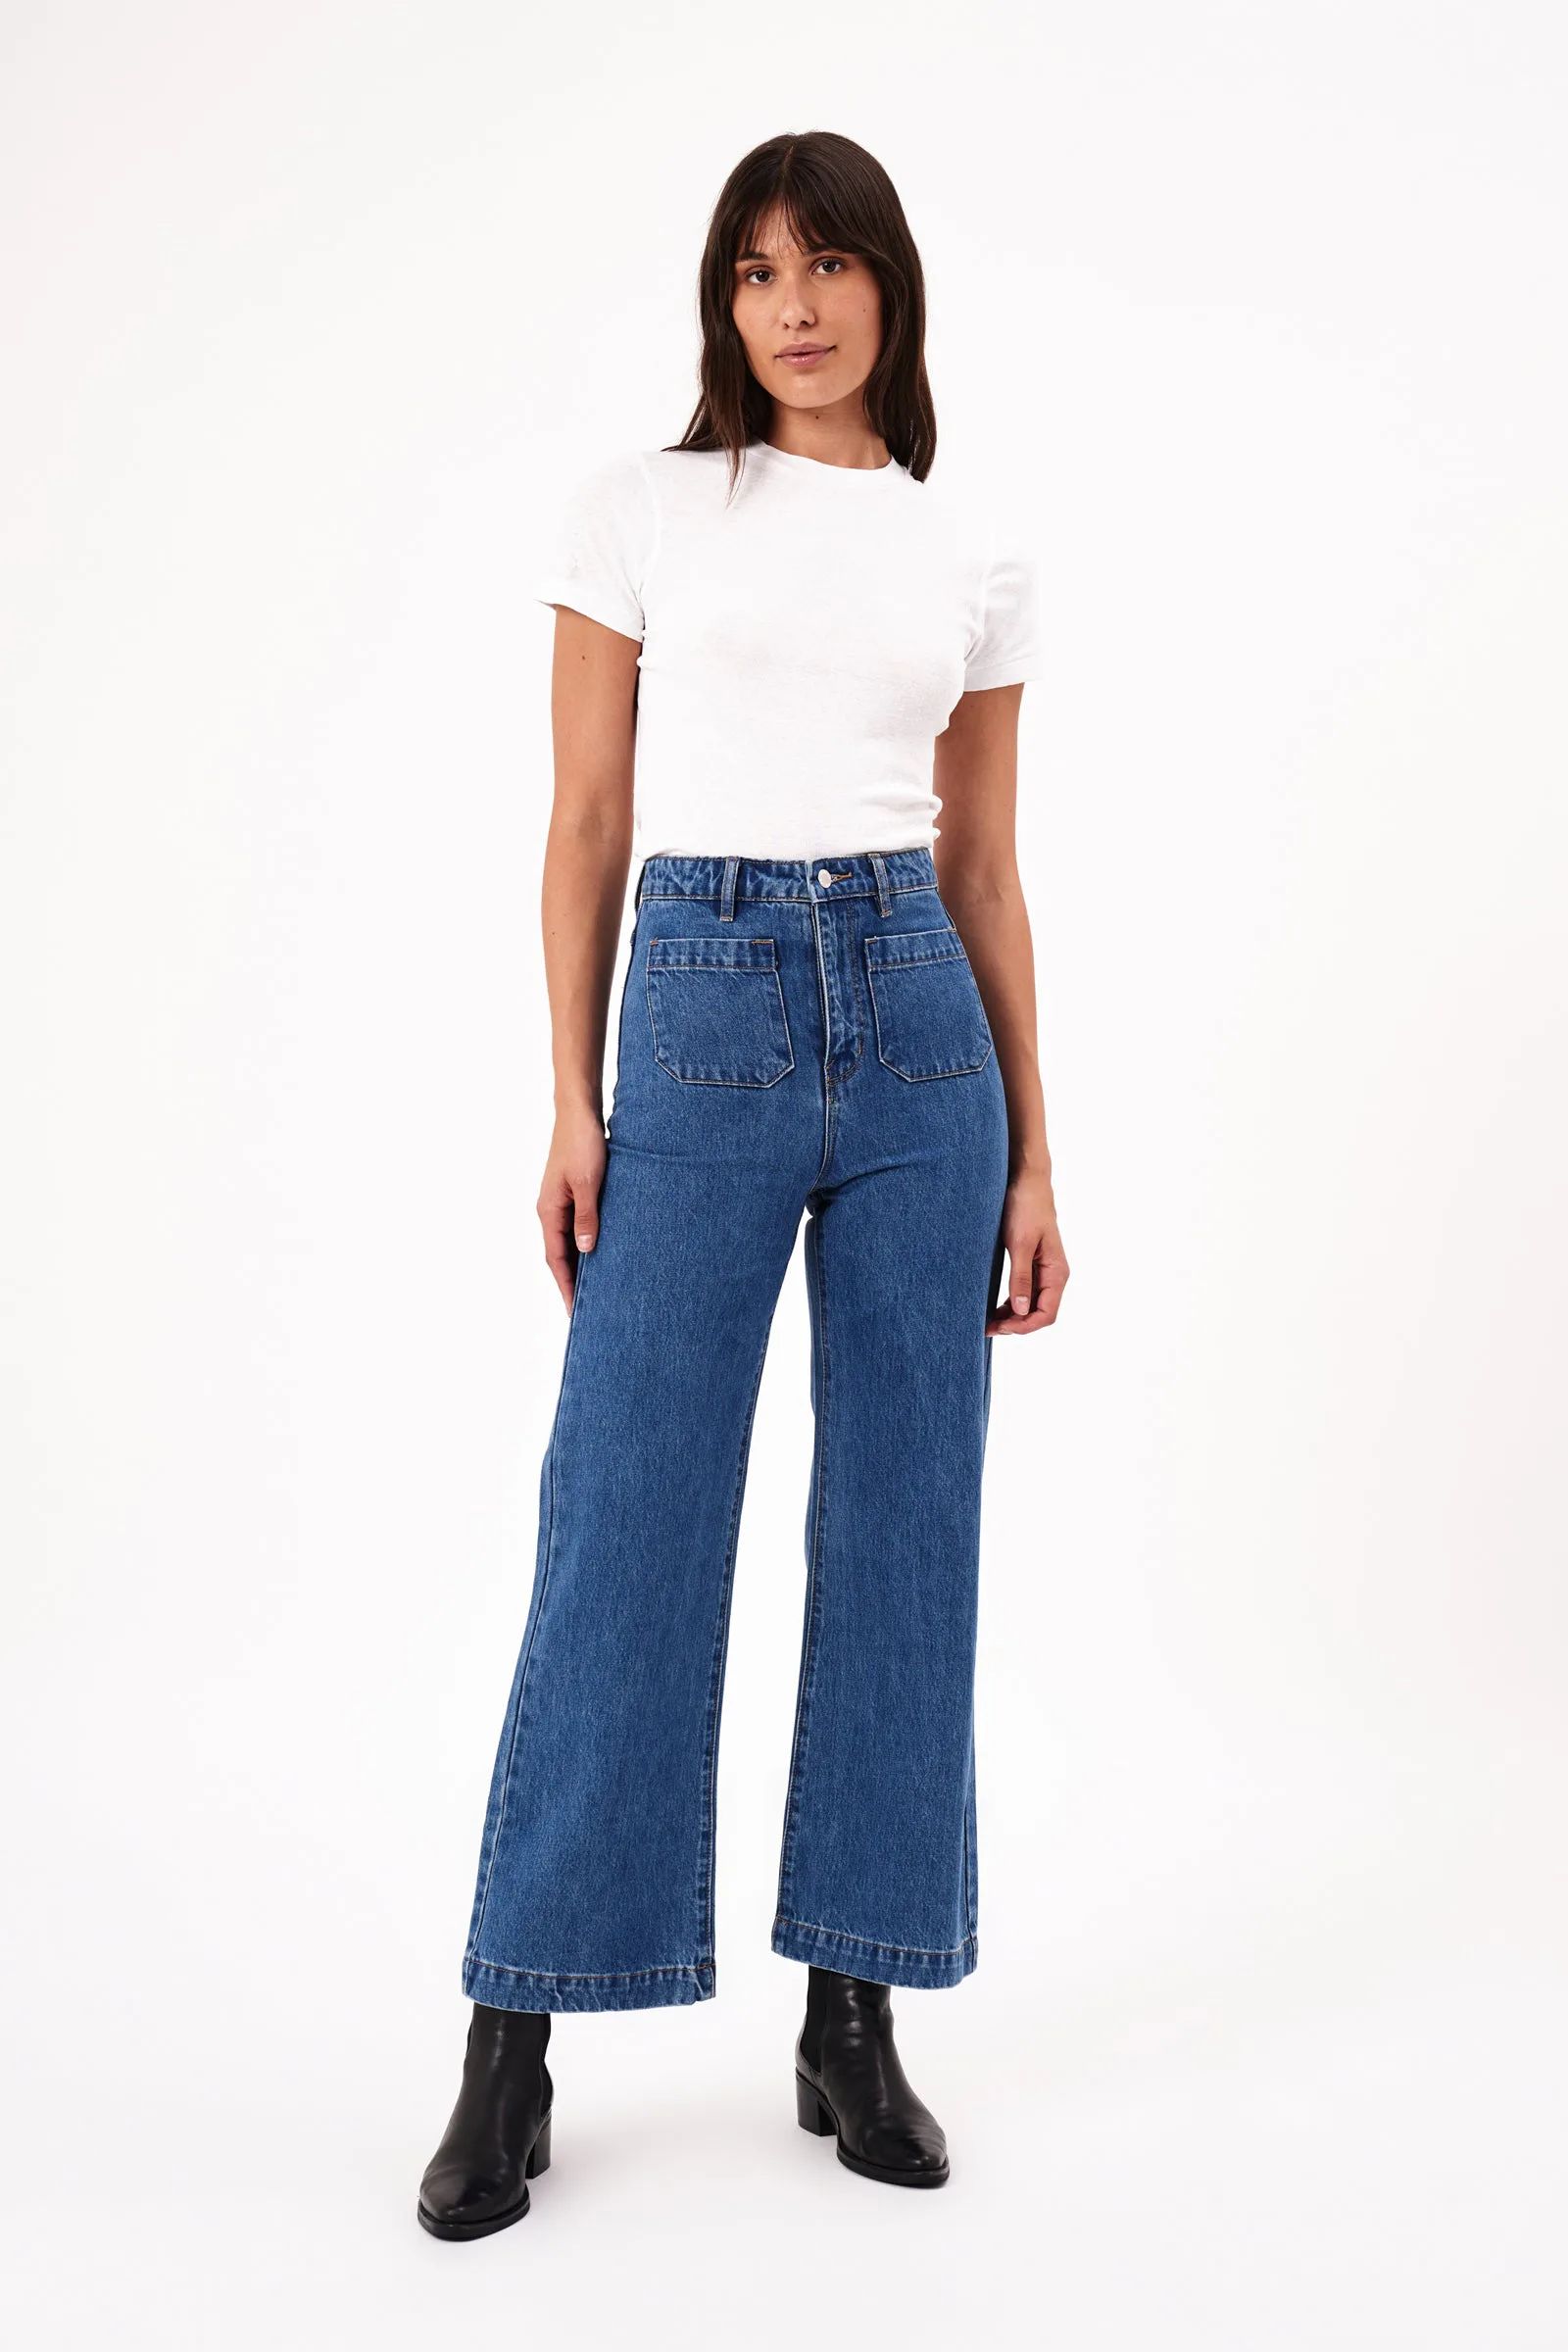 Sailor Jean - Ashley Blue | Rolla's Jeans US/CAN